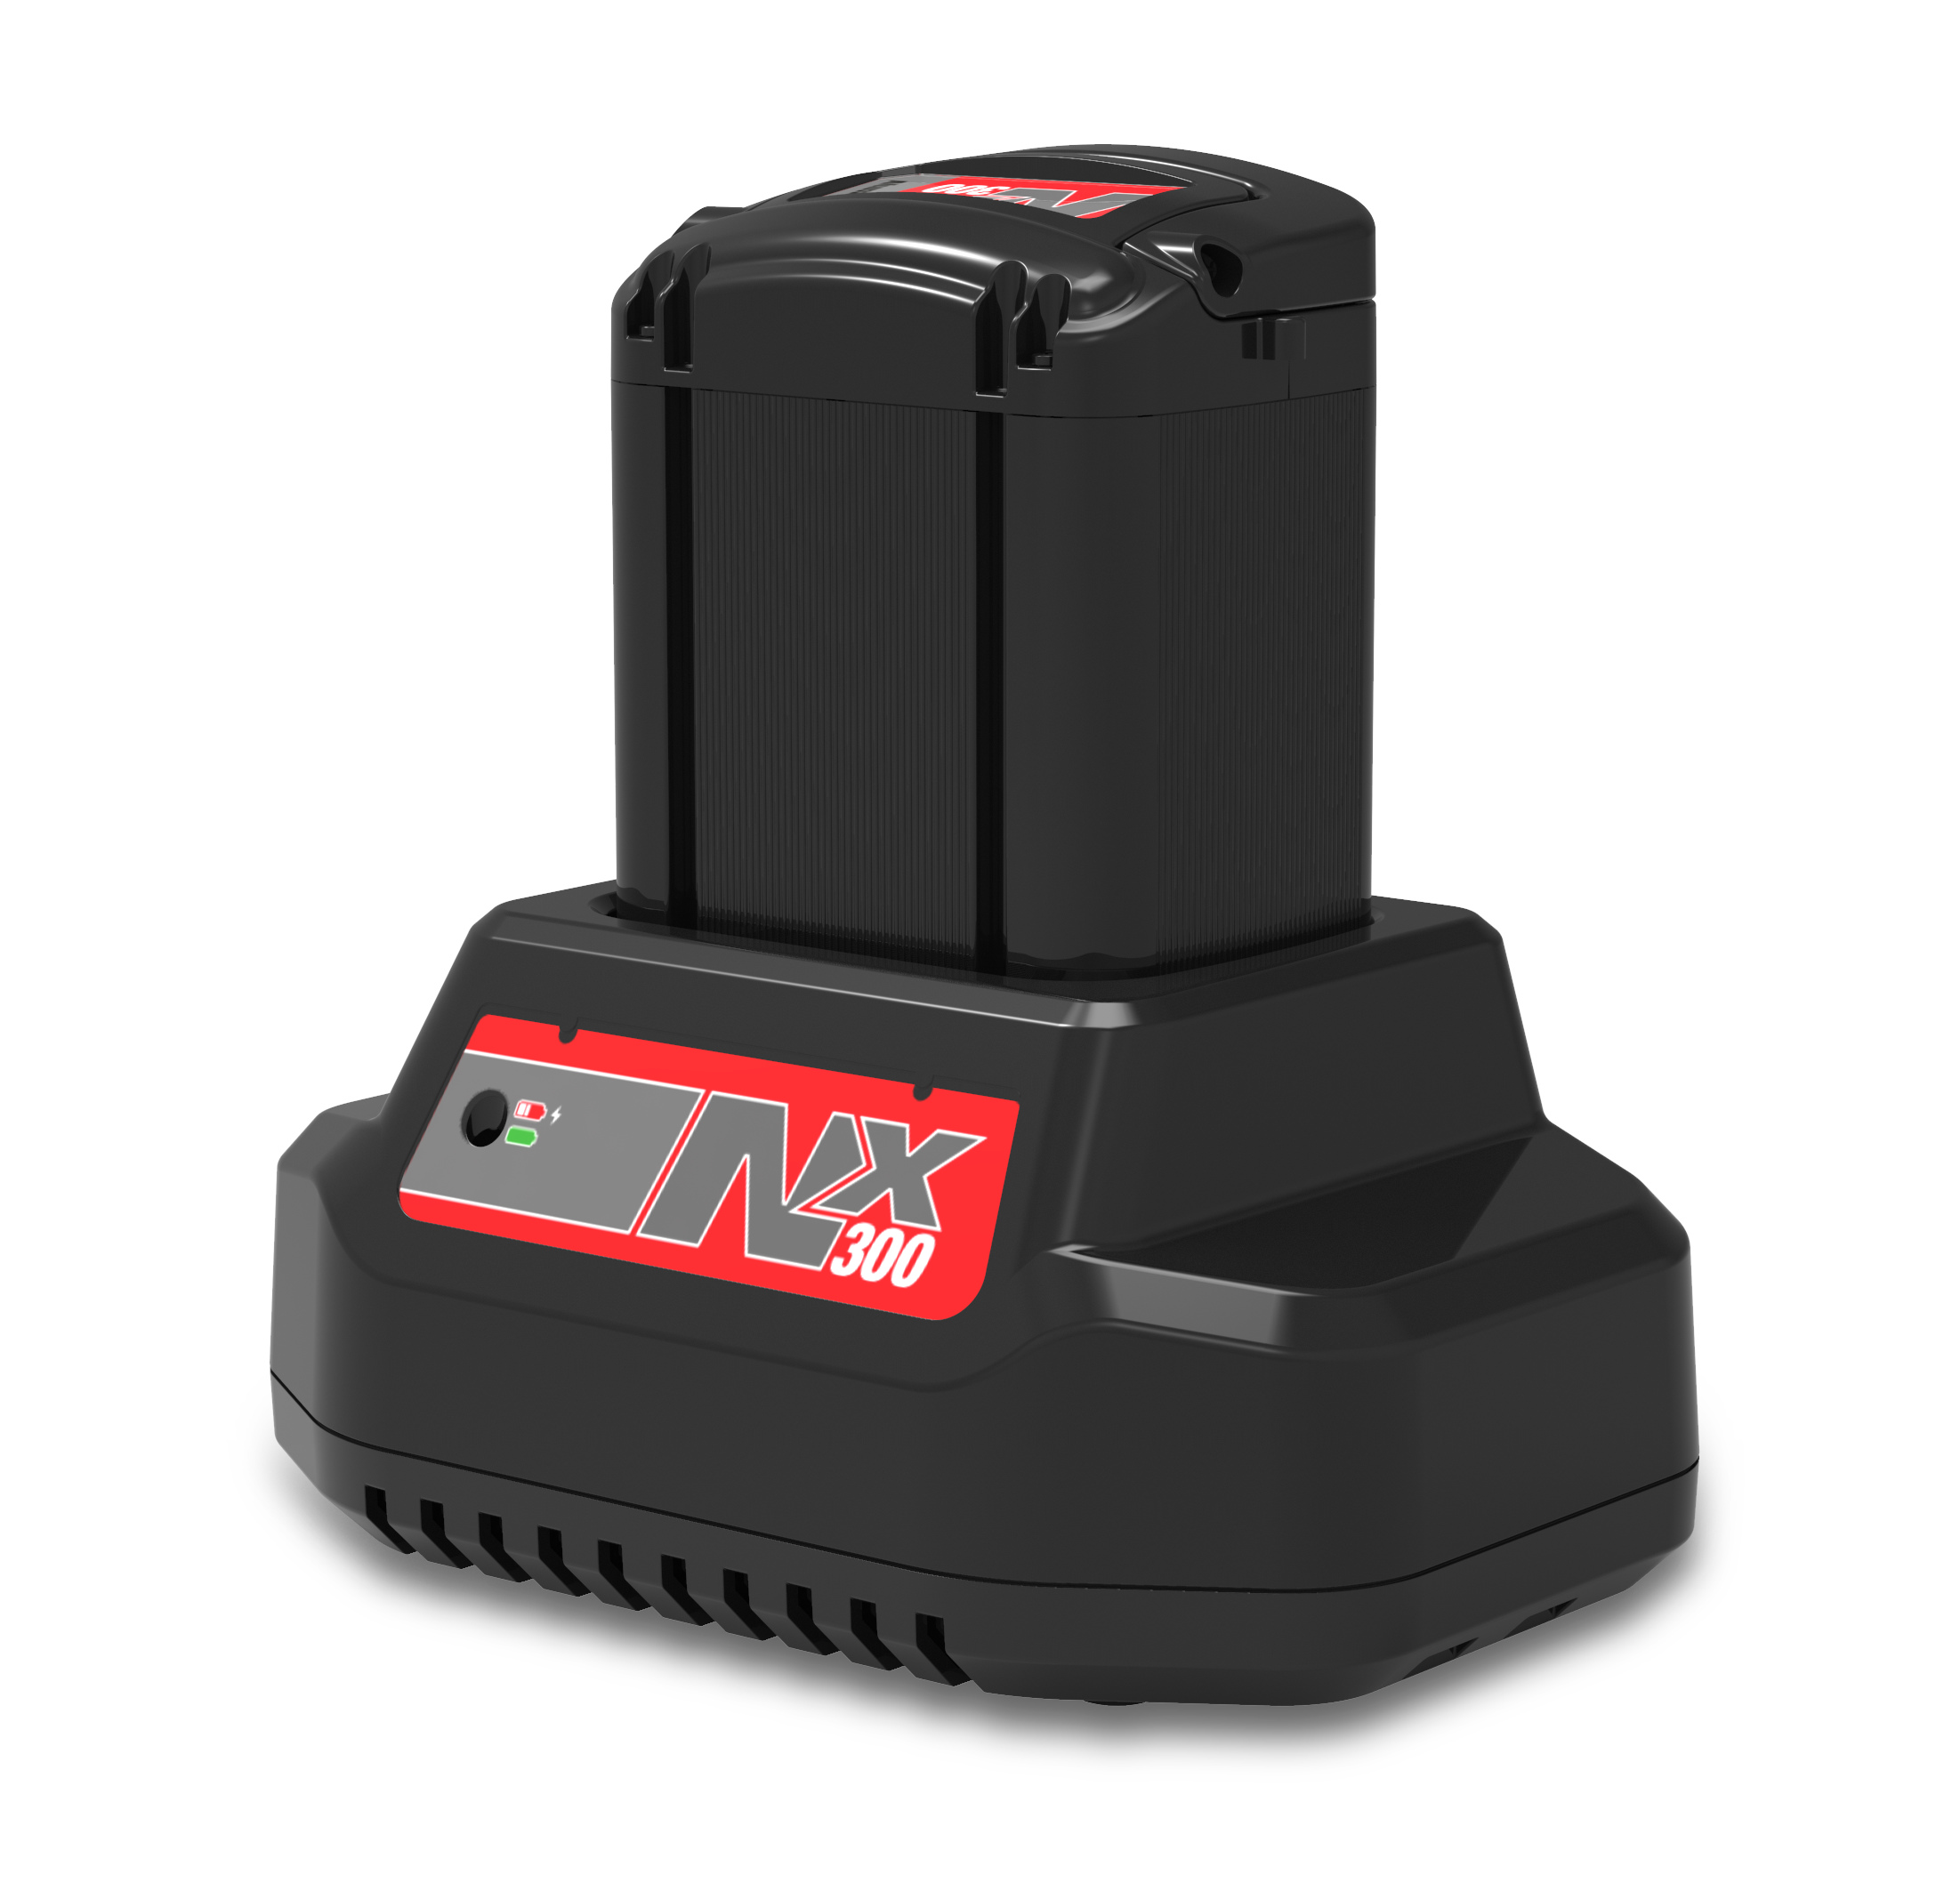 1. NX300 Battery on Charging Dock (handle down)